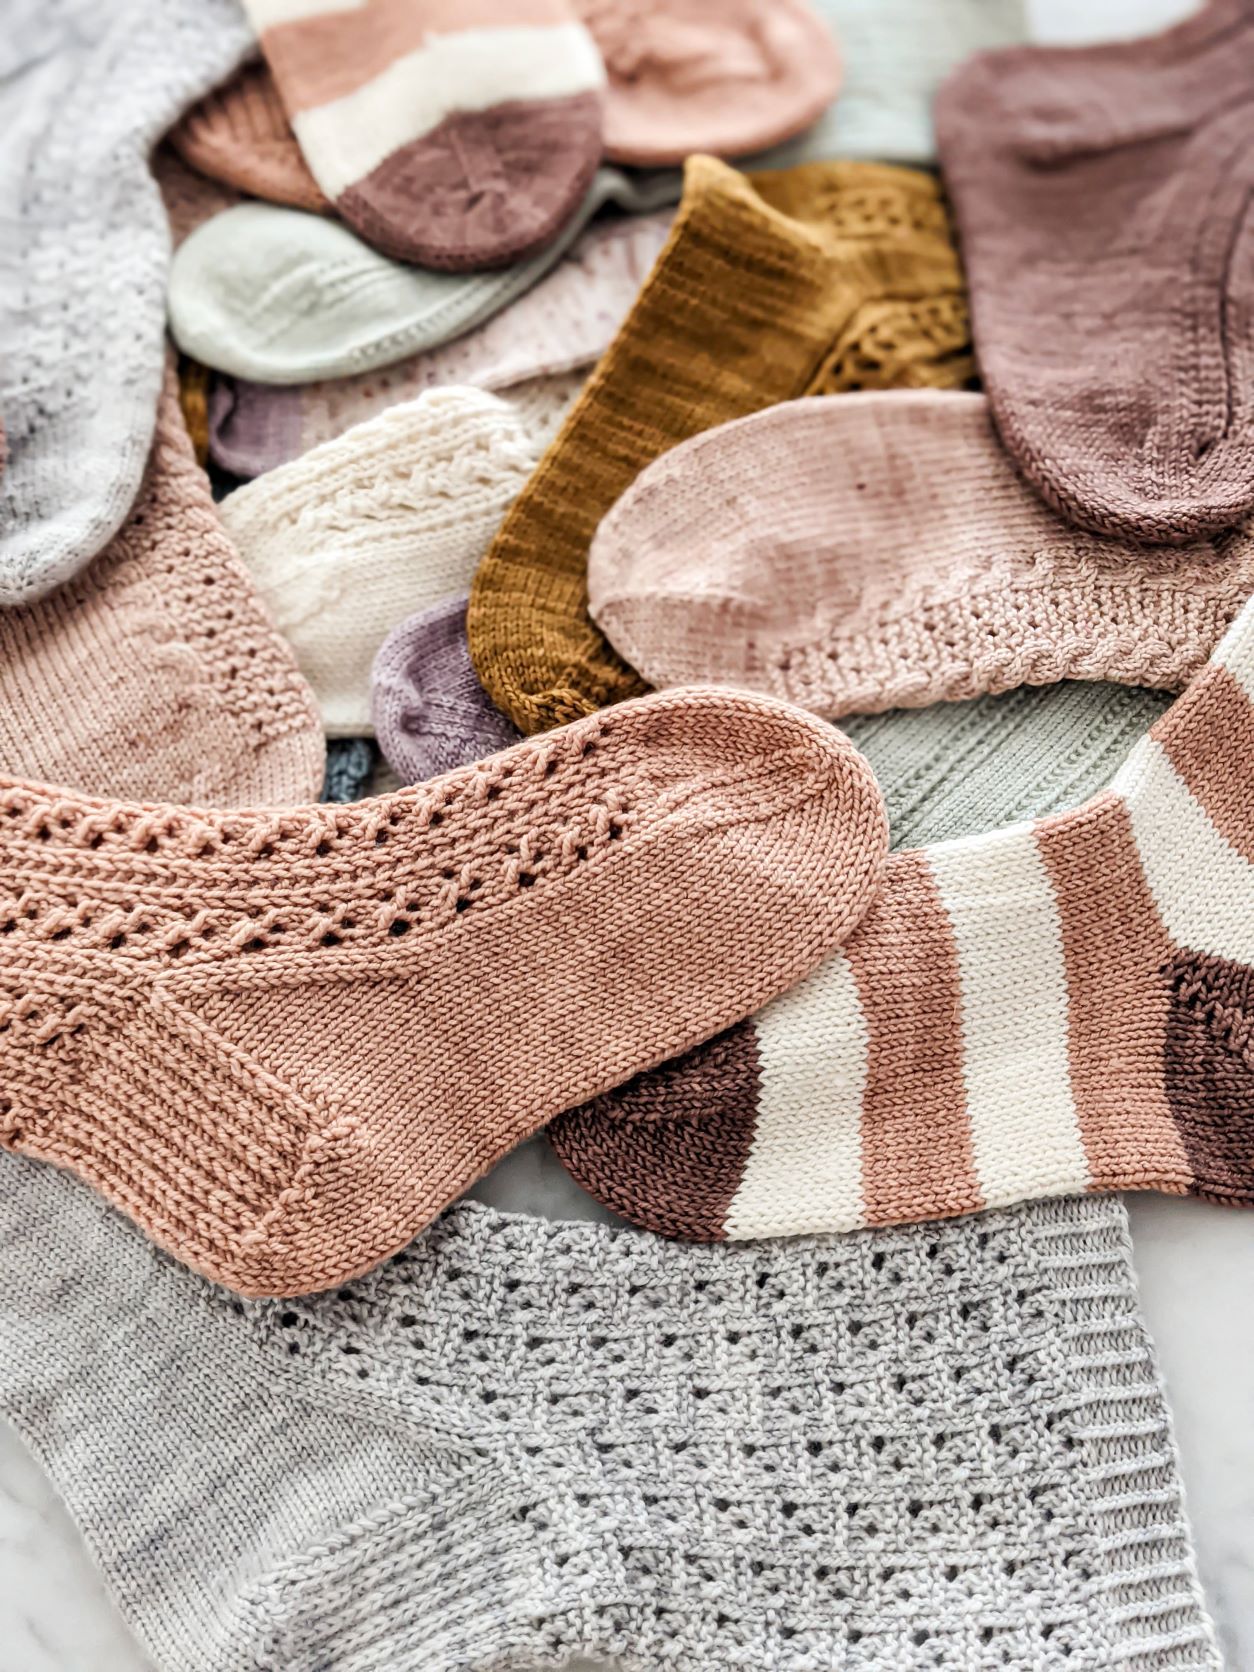 A pile of pink, brown, mint, blue, purple, and striped socks in all different styles laid out flat on a countertop.